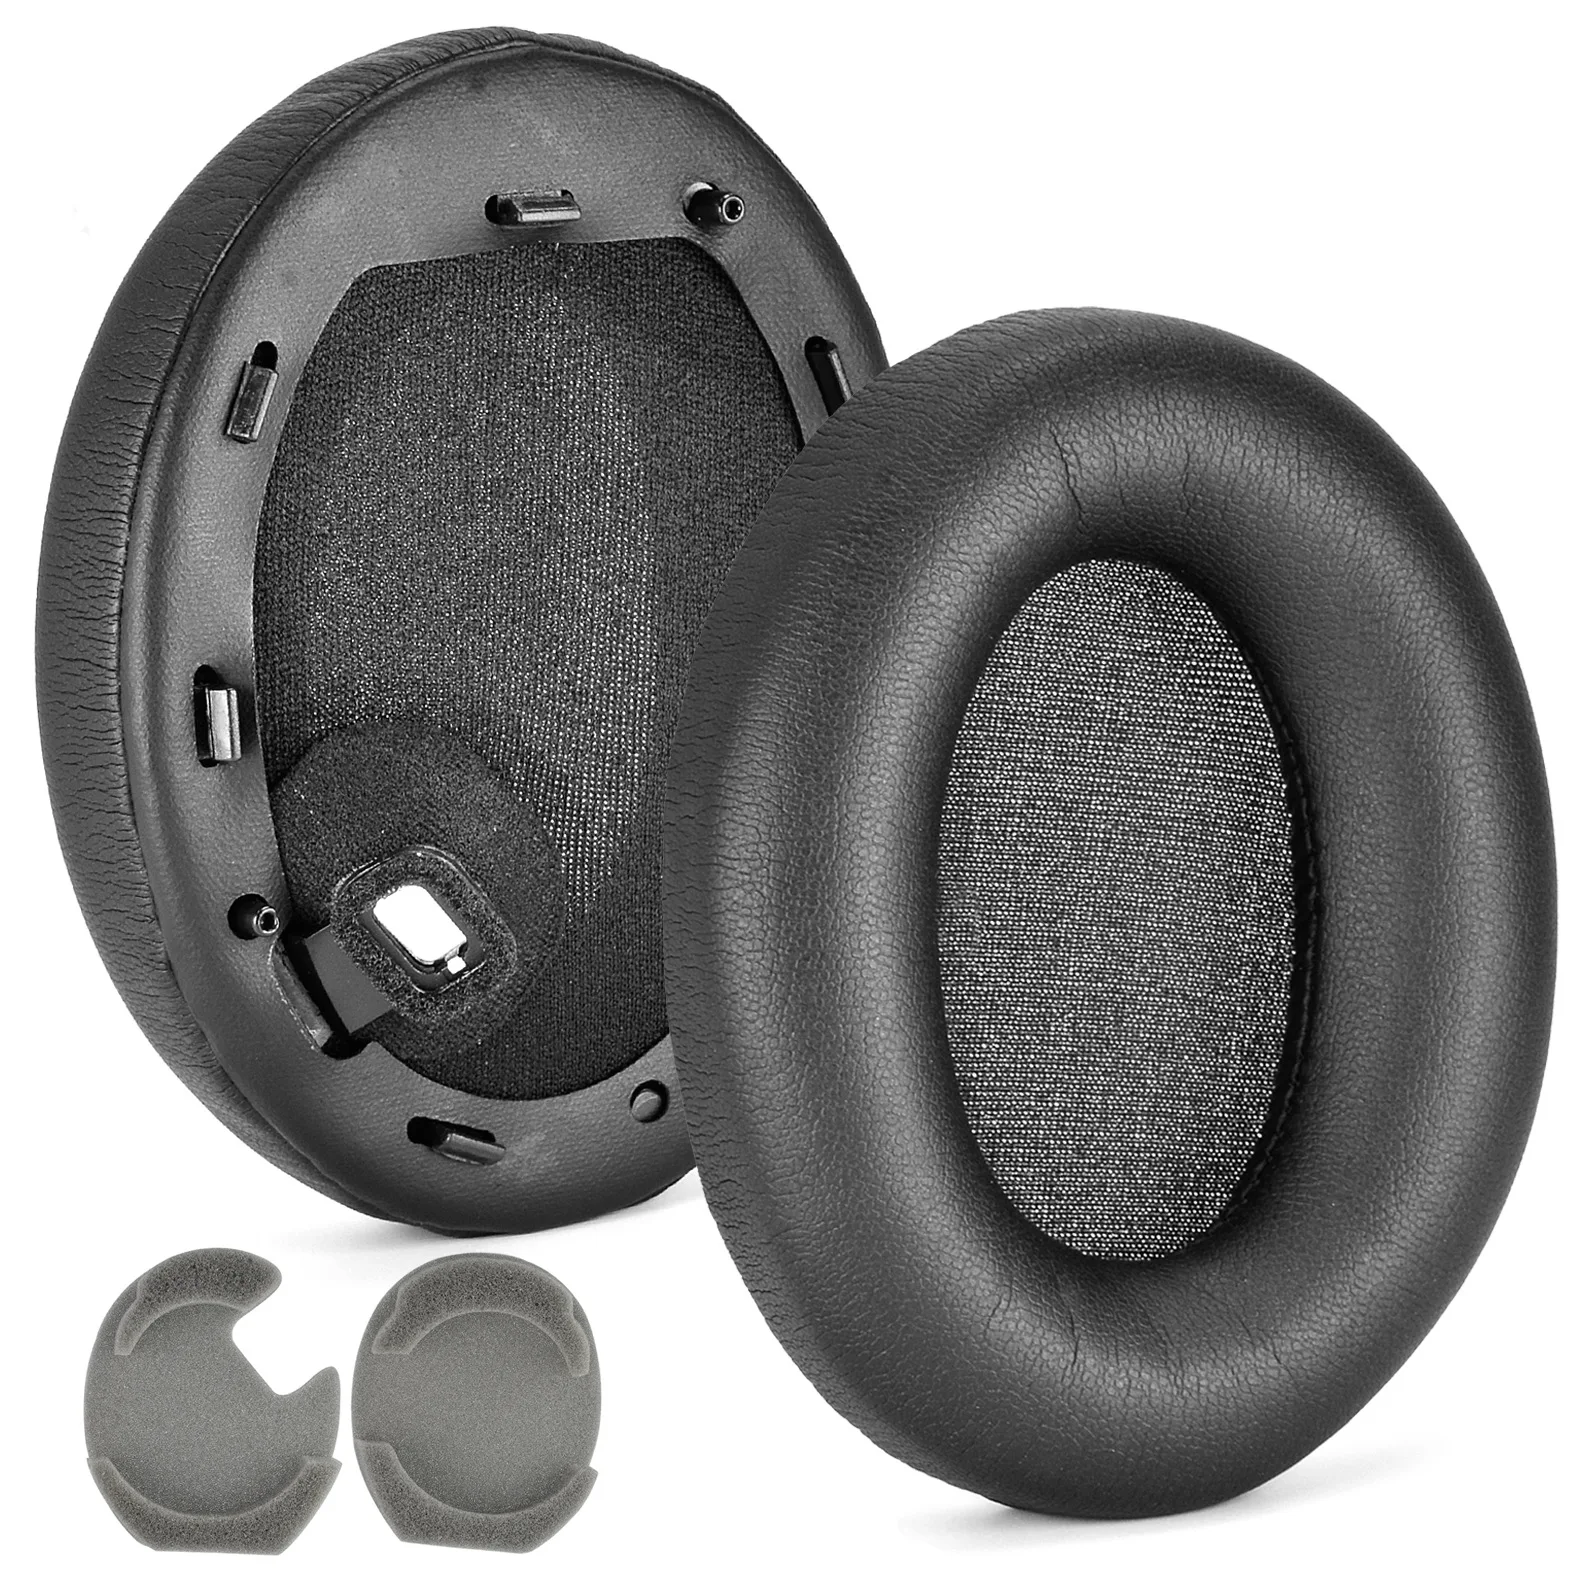 

for Sony WH-1000XM4 Ear pads Headphones Replacement Headset Ear Cushions Cover Earpads Ear pads, Black,brown